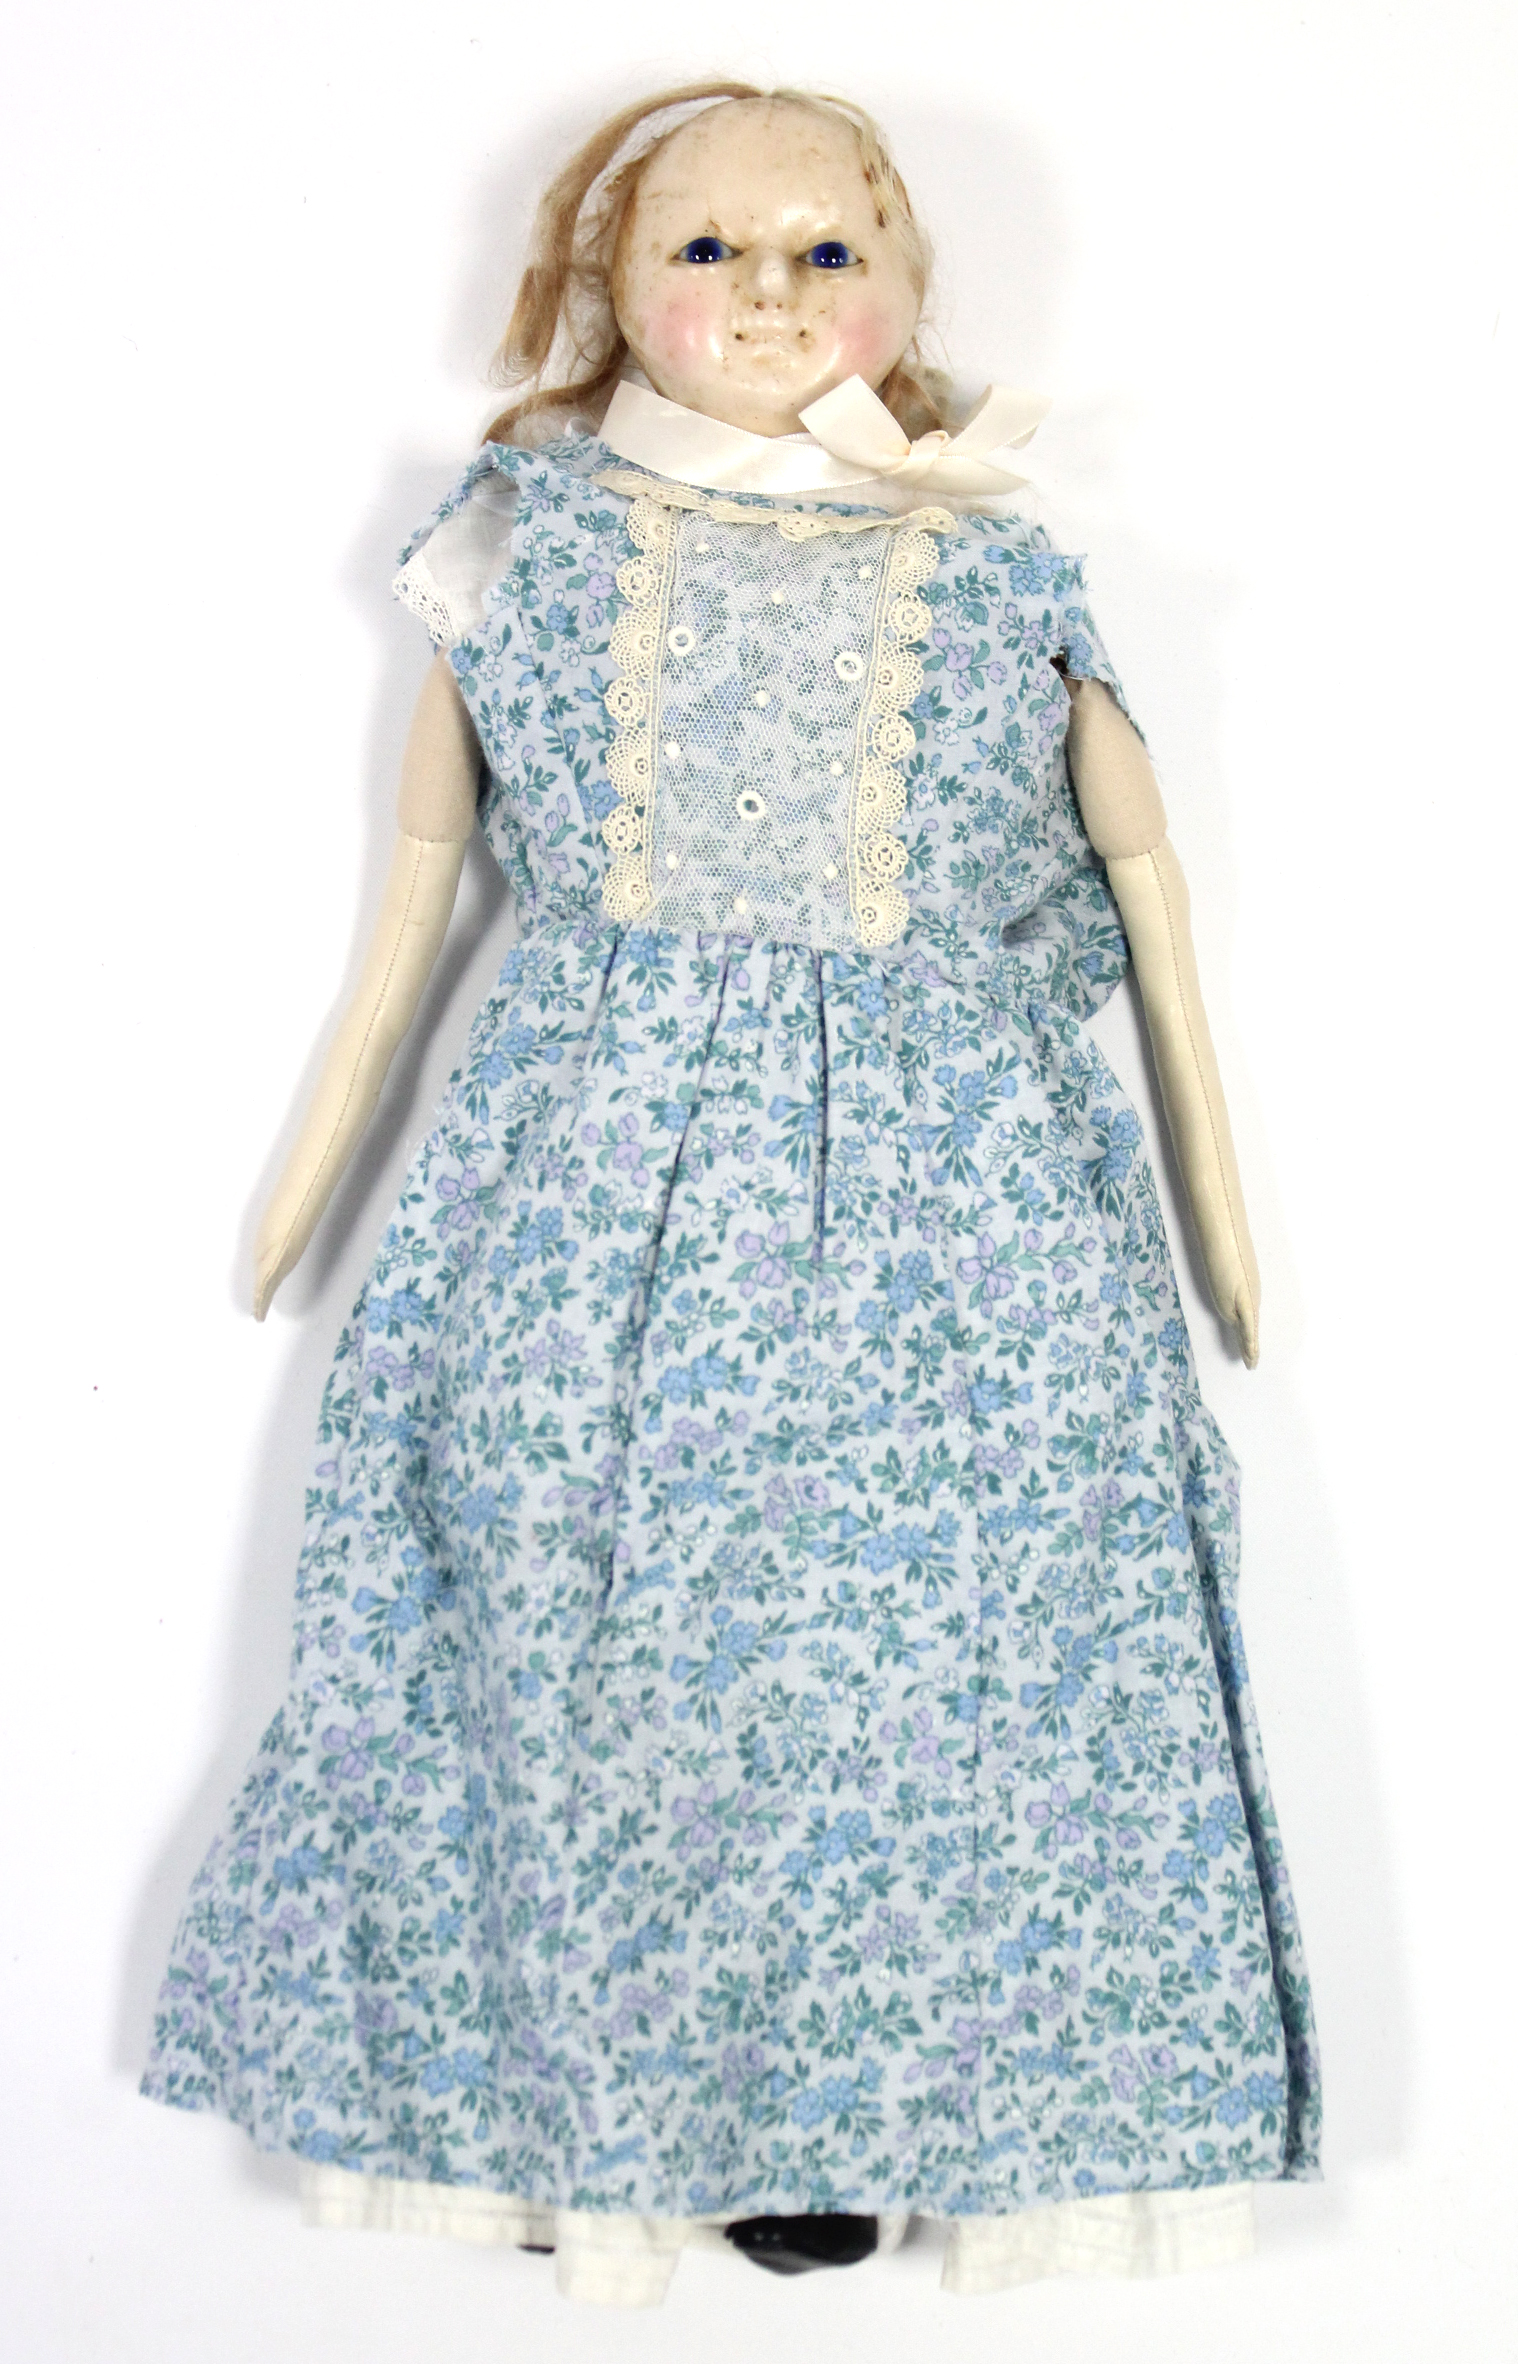 A Victorian wax head & shoulders girl doll with cloth body, 18” tall, dressed.